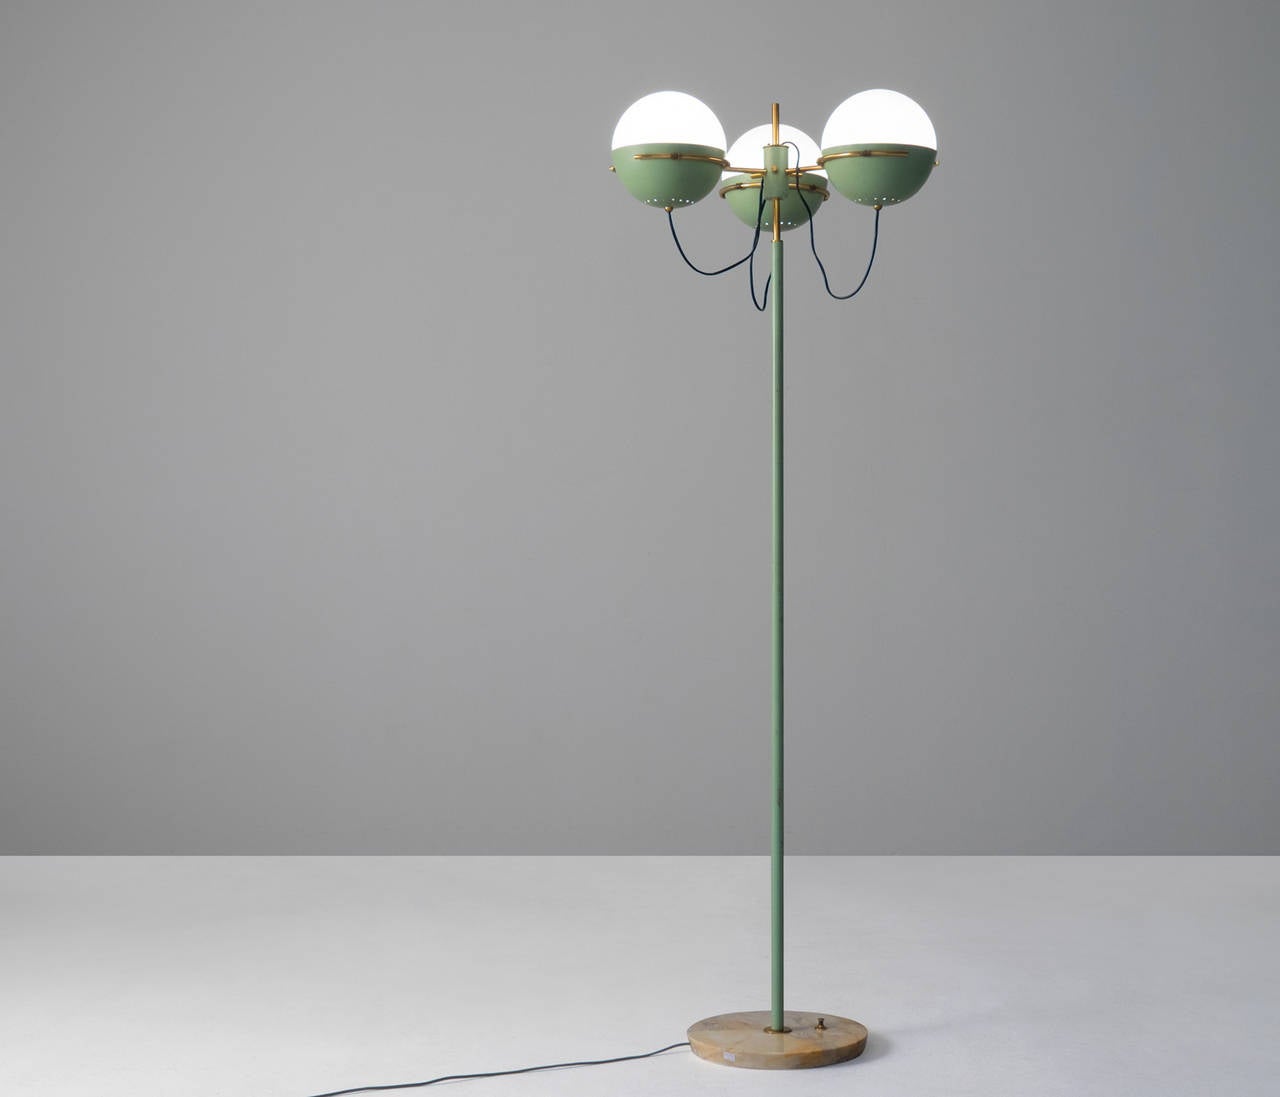 Floor Lamp by Stilnovo with Brass Details

Elegant standing floor lamp by Stilnovo, Milan, Italy.
The mint green shades goes very well with the brass and white globes. 

The base is in marble, and finished with stunning brass details.
We do